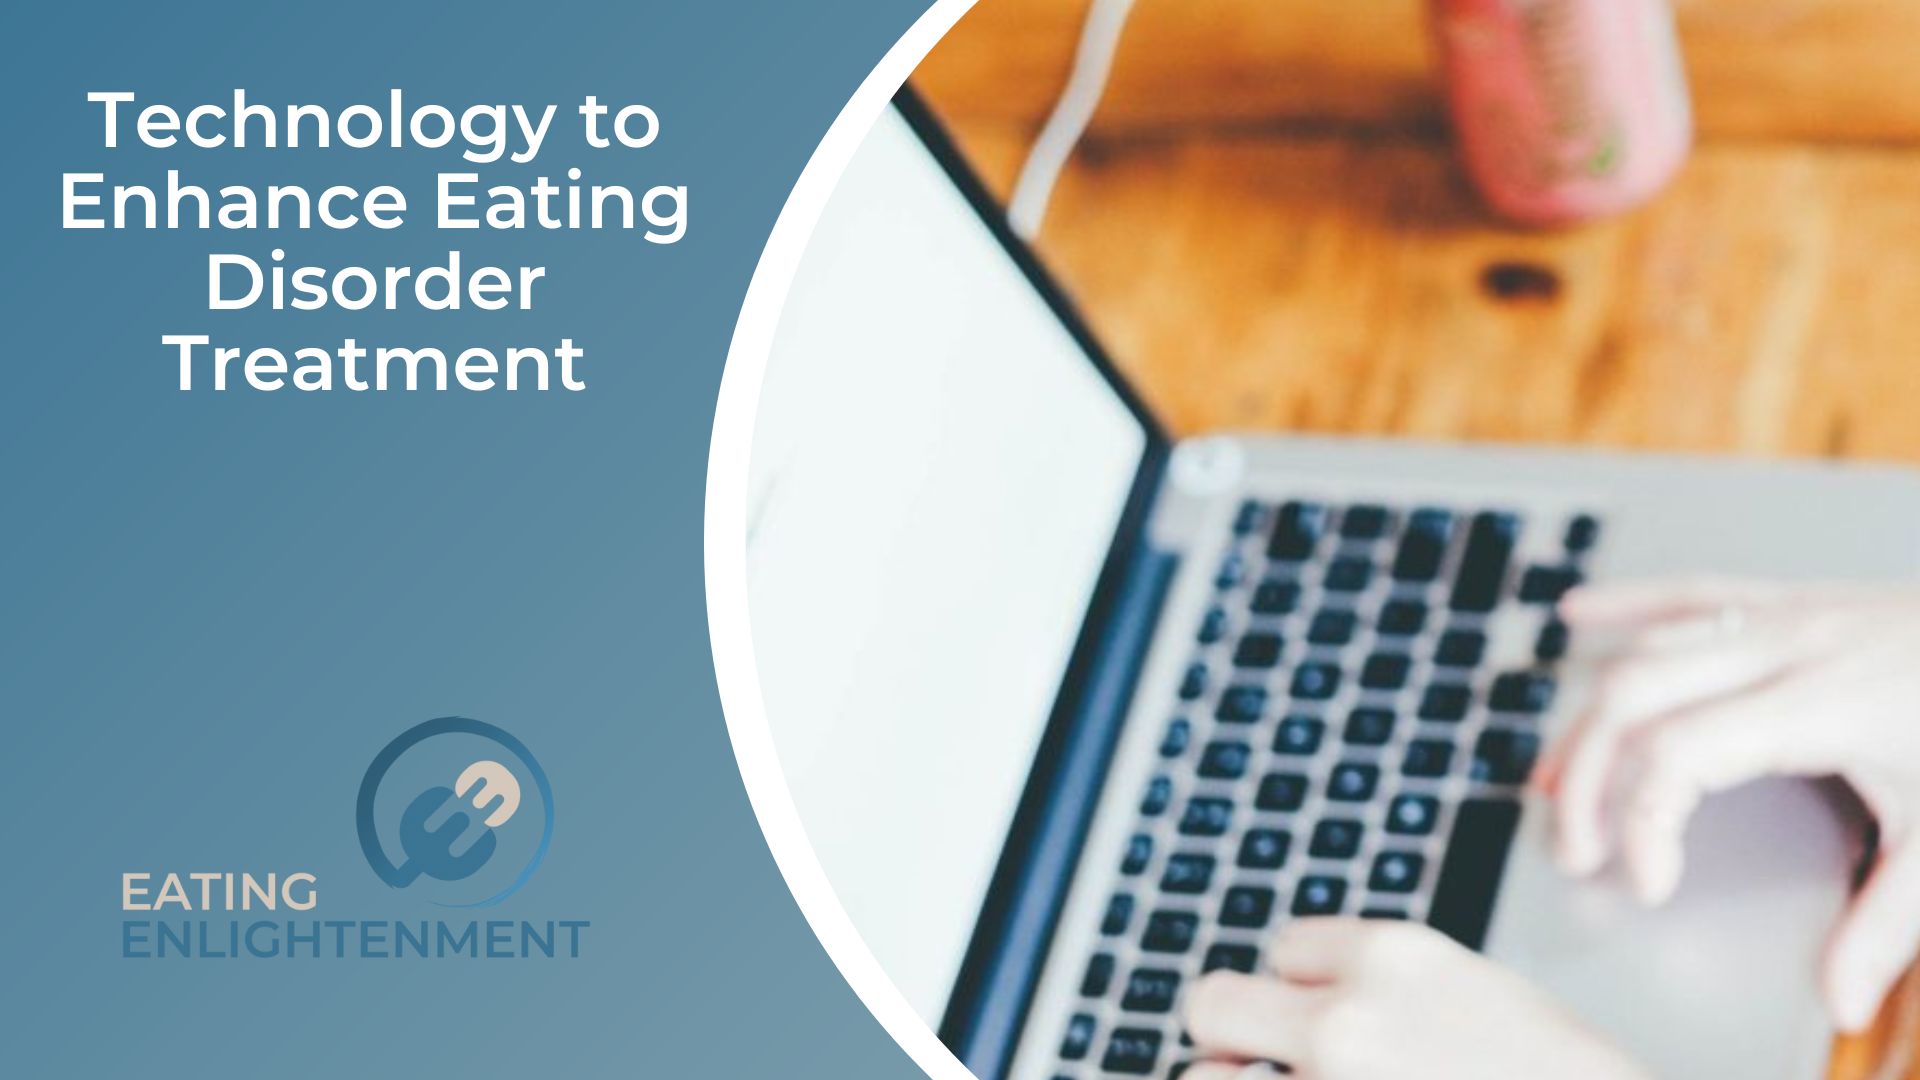 Technology to Enhance Eating Disorder Treatment